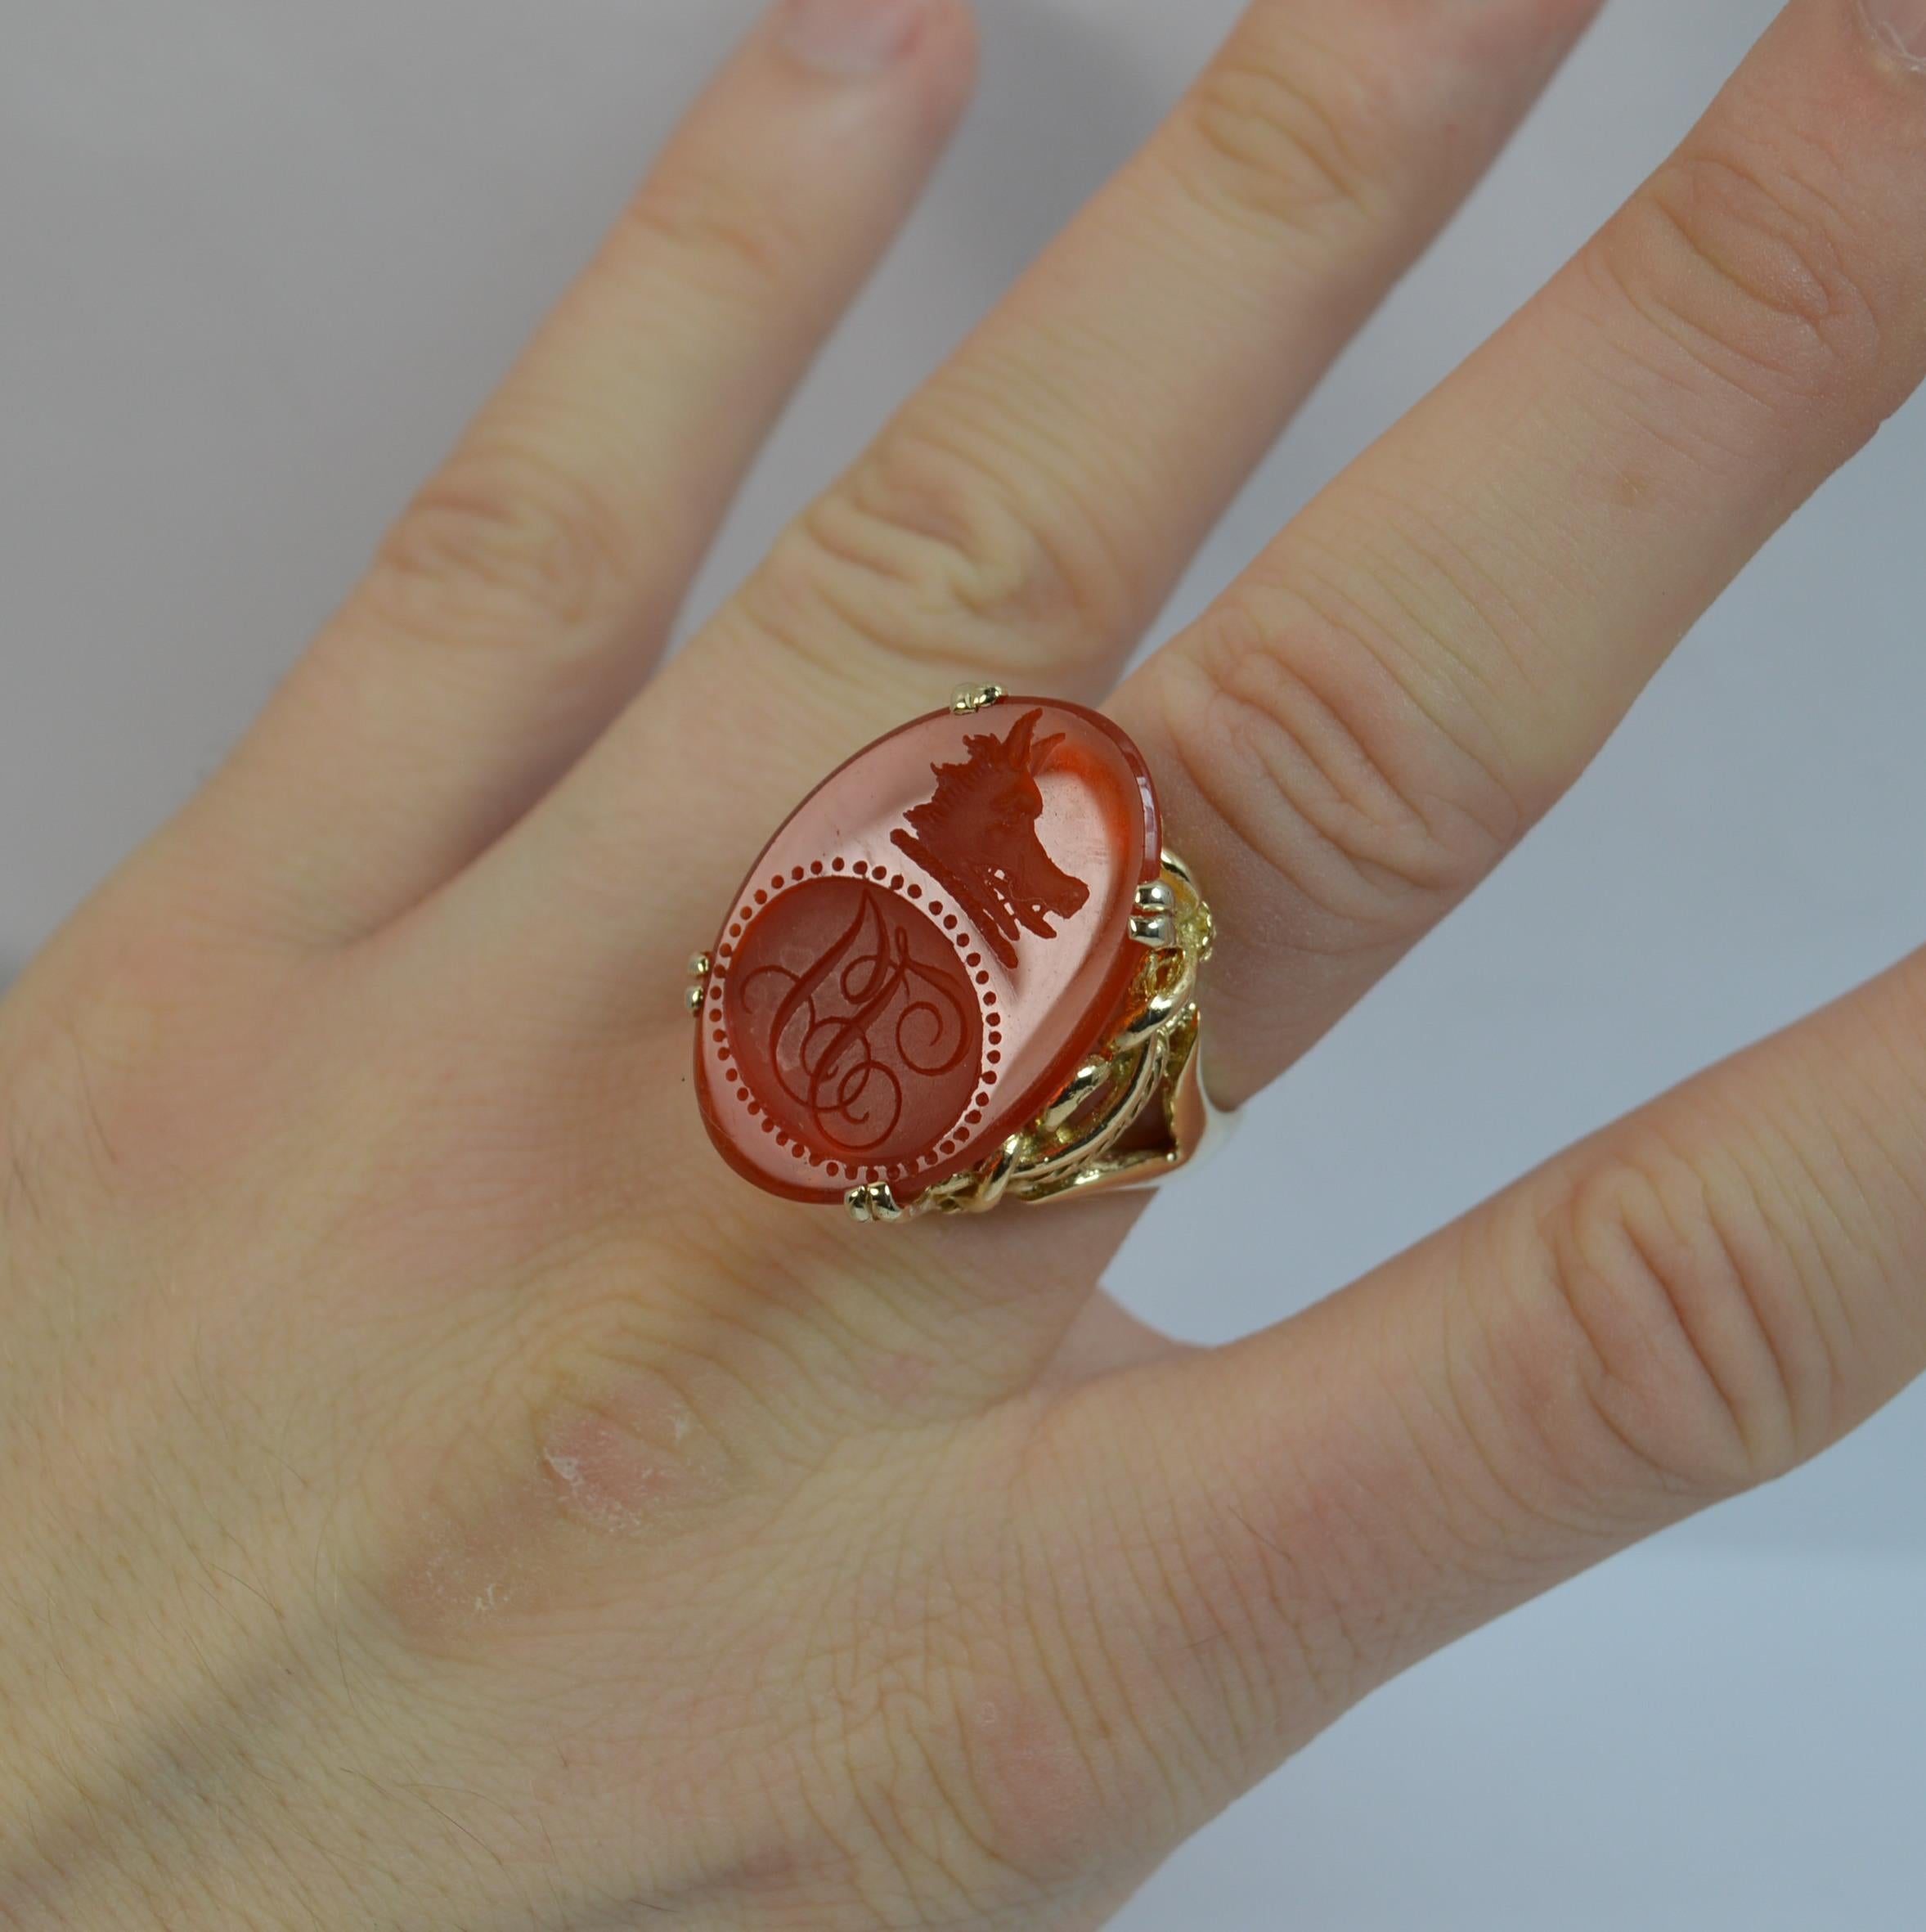 
A stunning 9 carat gold and carnelian ring.

18mm x 27mm oval or navette shaped carnelian with intaglio seal engraved. The design is of a wild boar head above a cartouche with two initials engraved.

The intaglio of Georgian era set into a